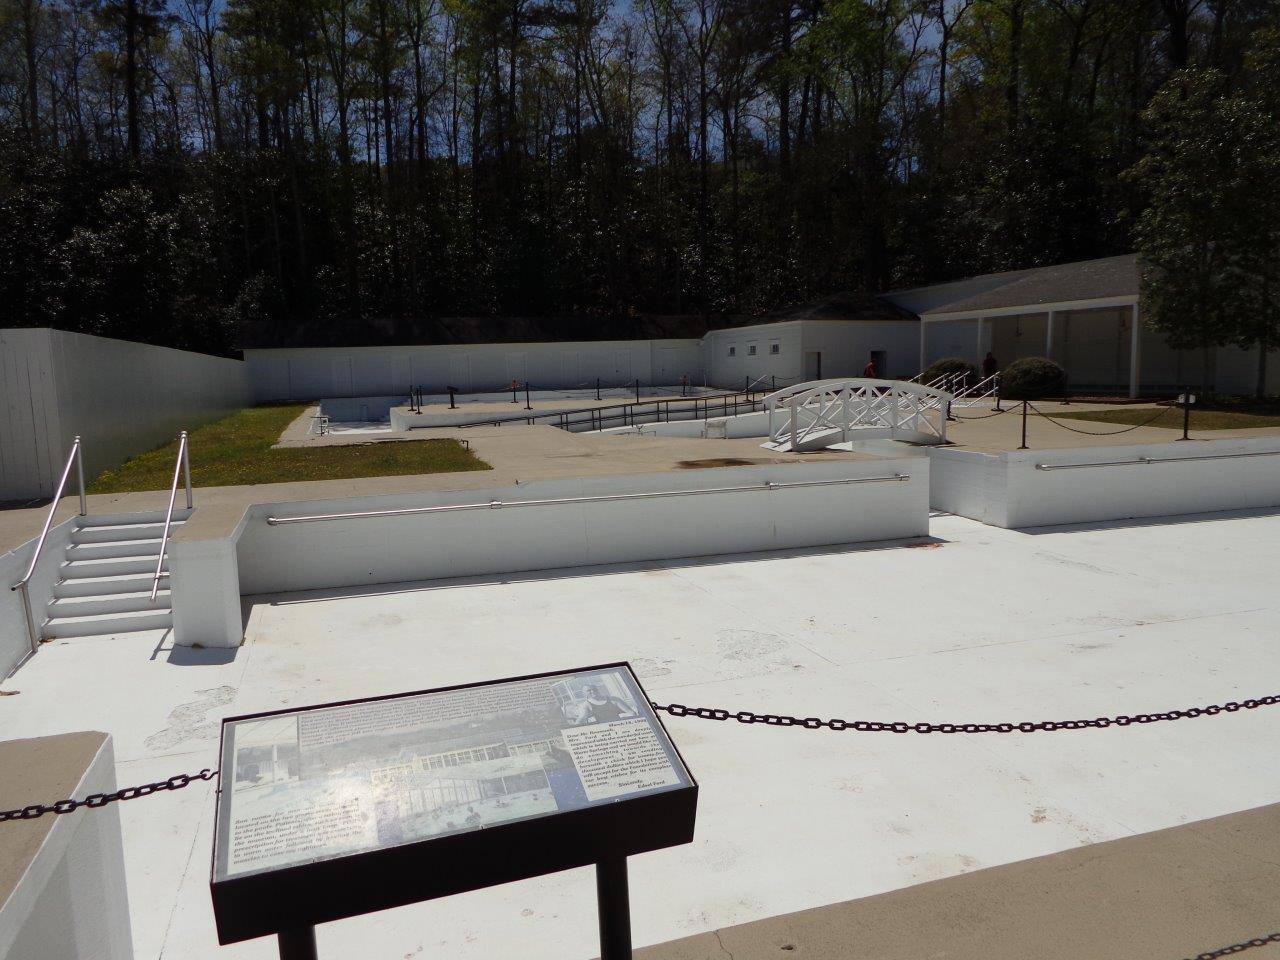 Warm Springs pools used by FDR